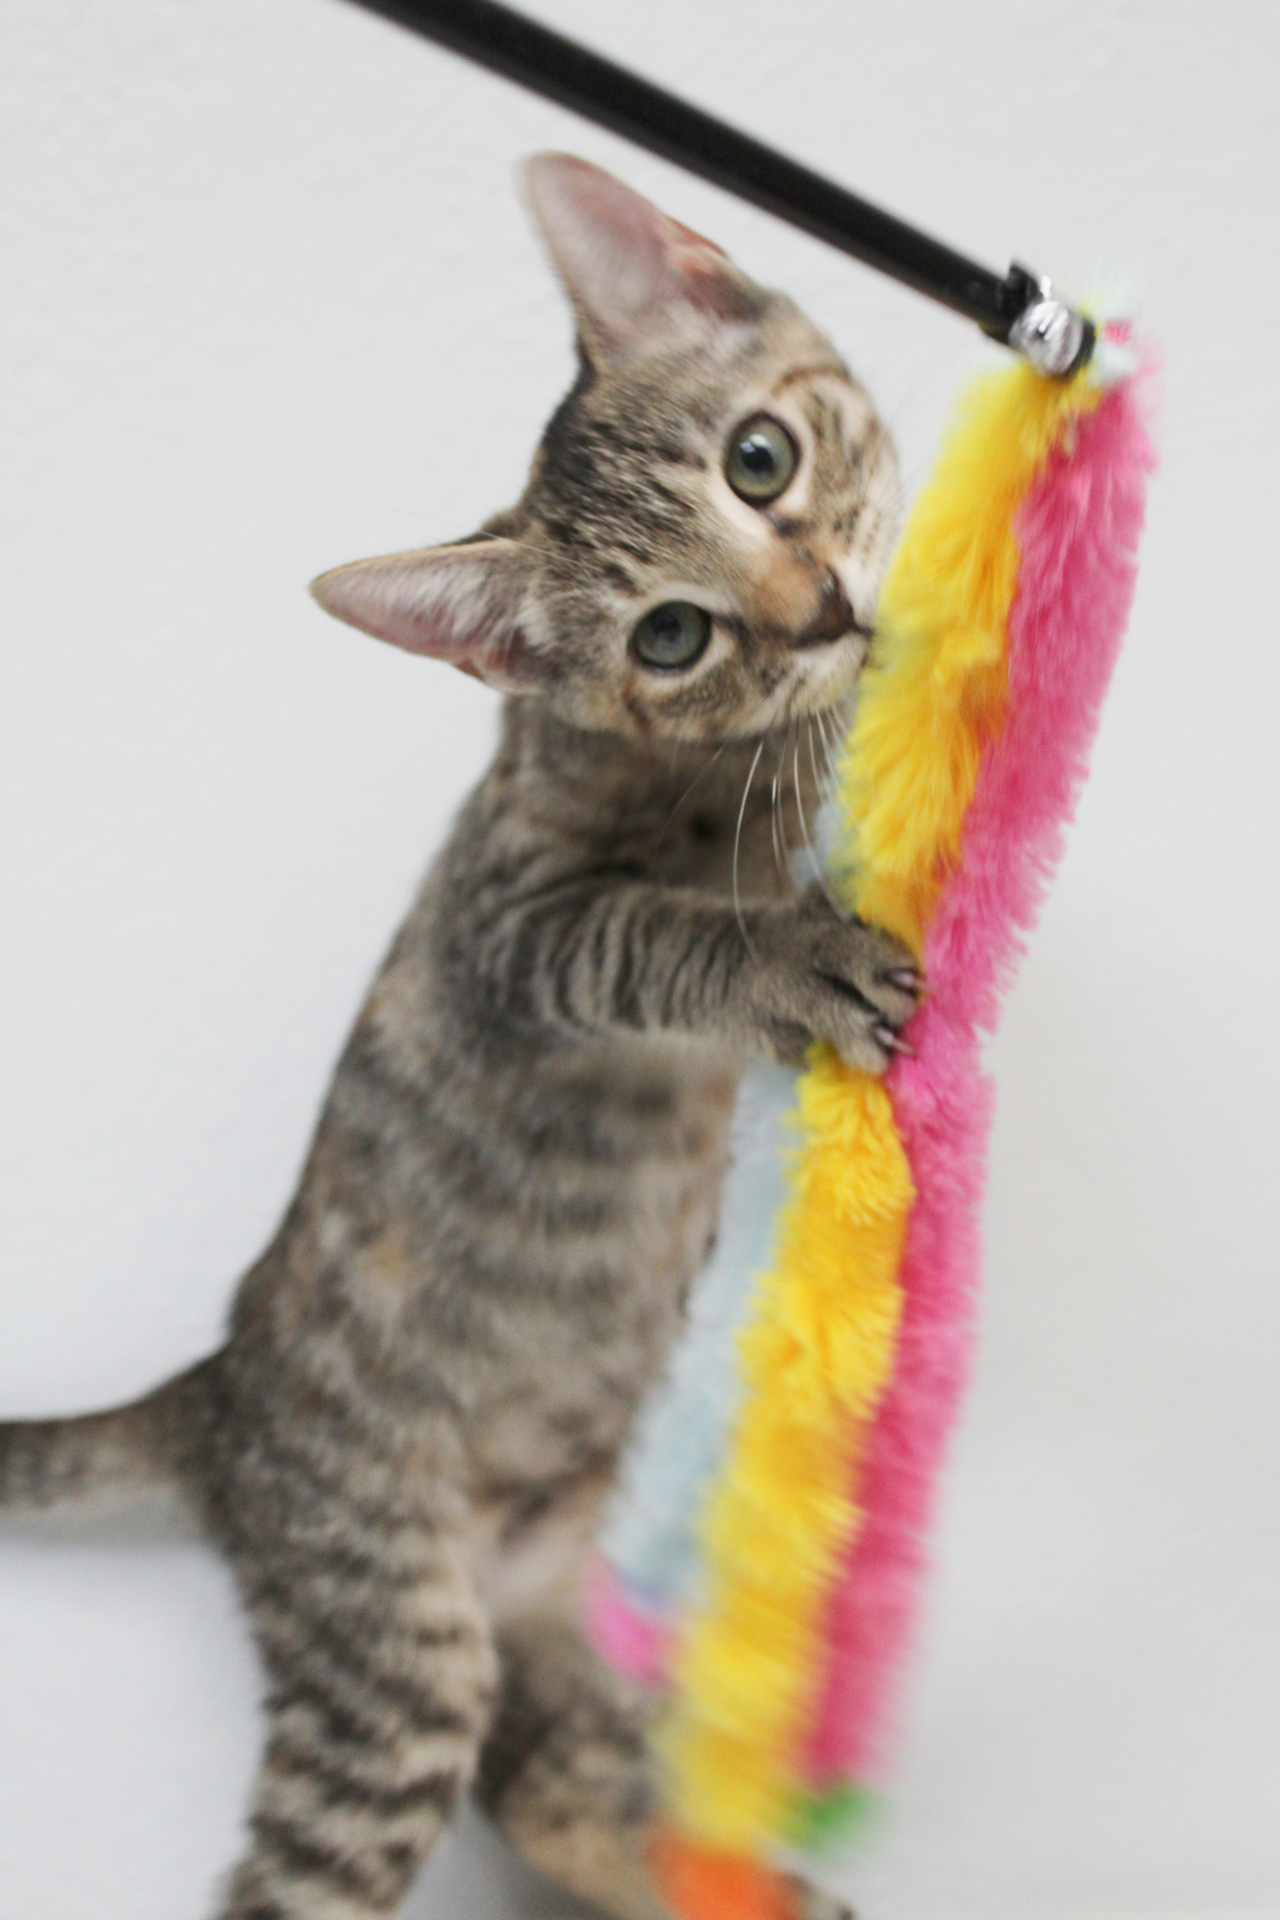 Meet Taylor Swift the kitten at St. Petersburg's Friends of Strays animal  shelter | Tampa | Creative Loafing Tampa Bay